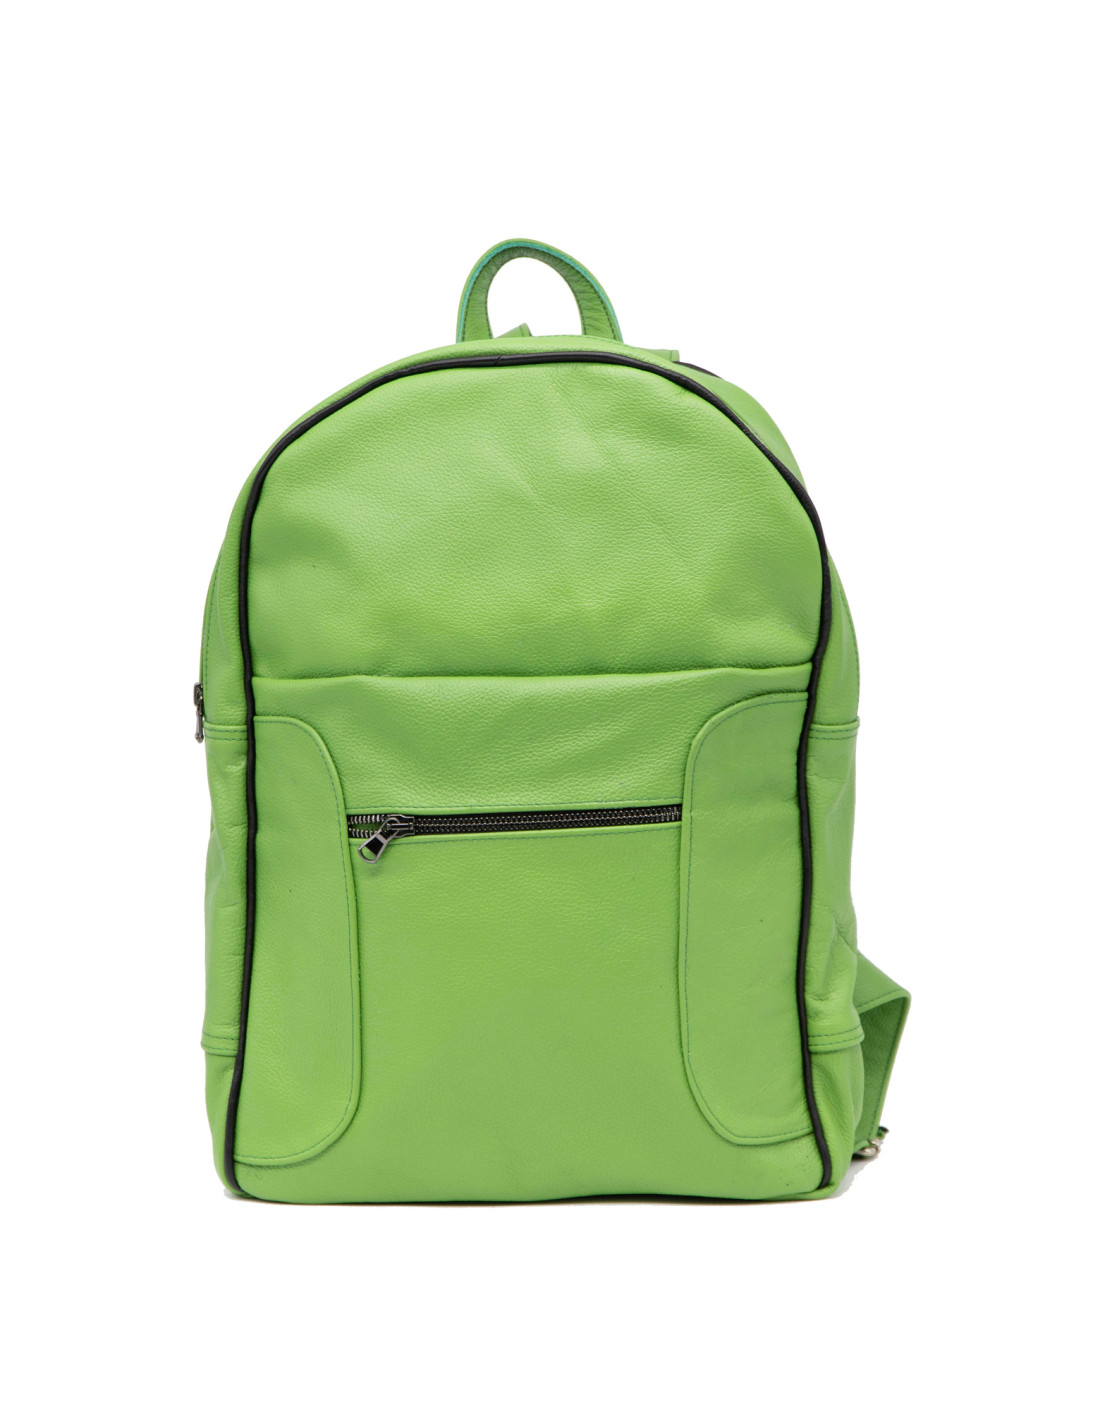 Palermo - Backpack in Genuine Light Green Leather - LEATHER BACKPACKS ...